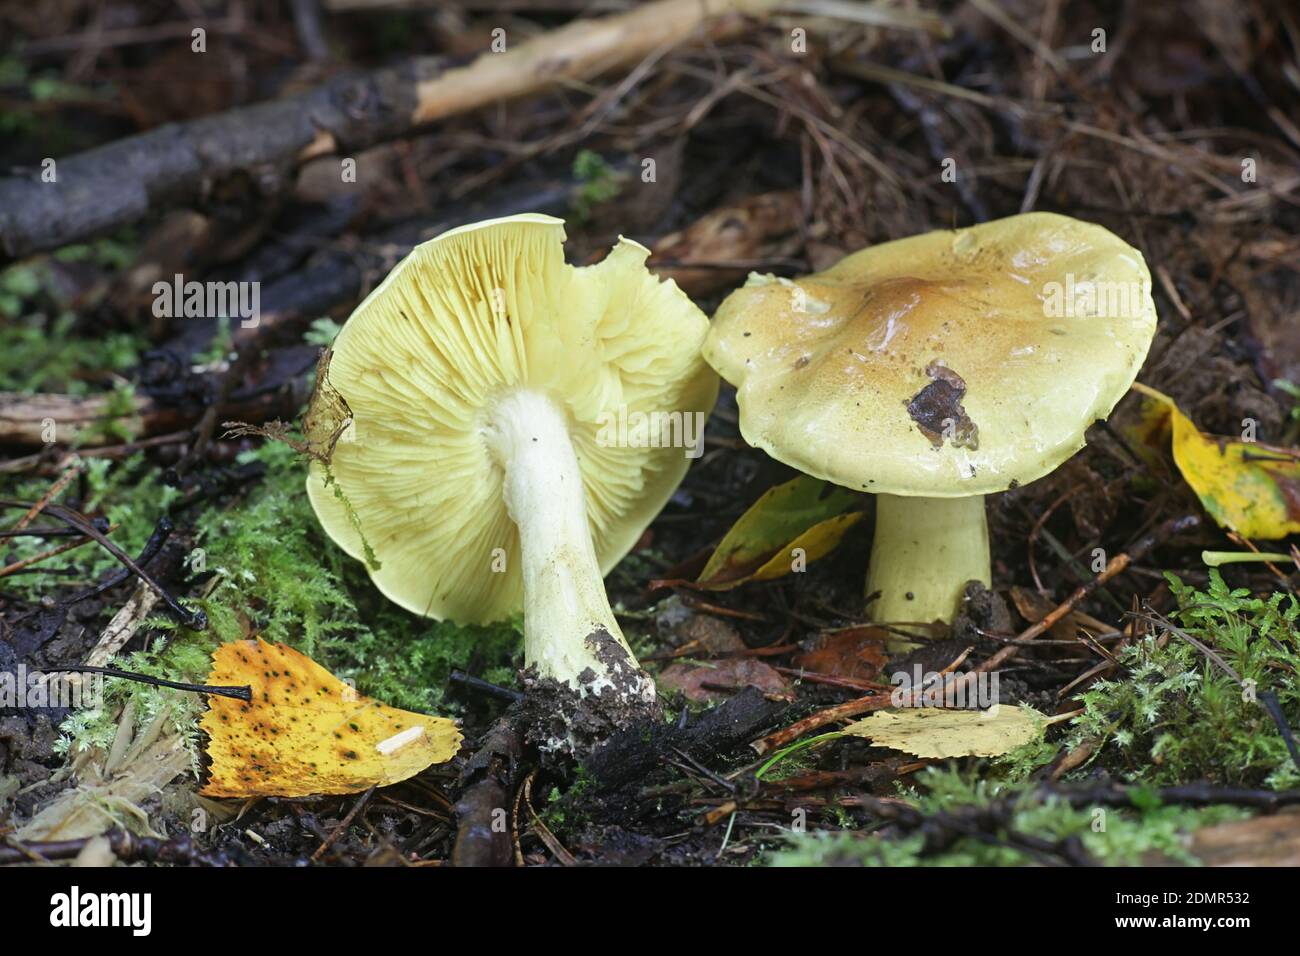 Tricholoma frondosae (Tricholoma equestre var. populinum), known as man on horseback or yellow knight, mushrooms from Finland Stock Photo